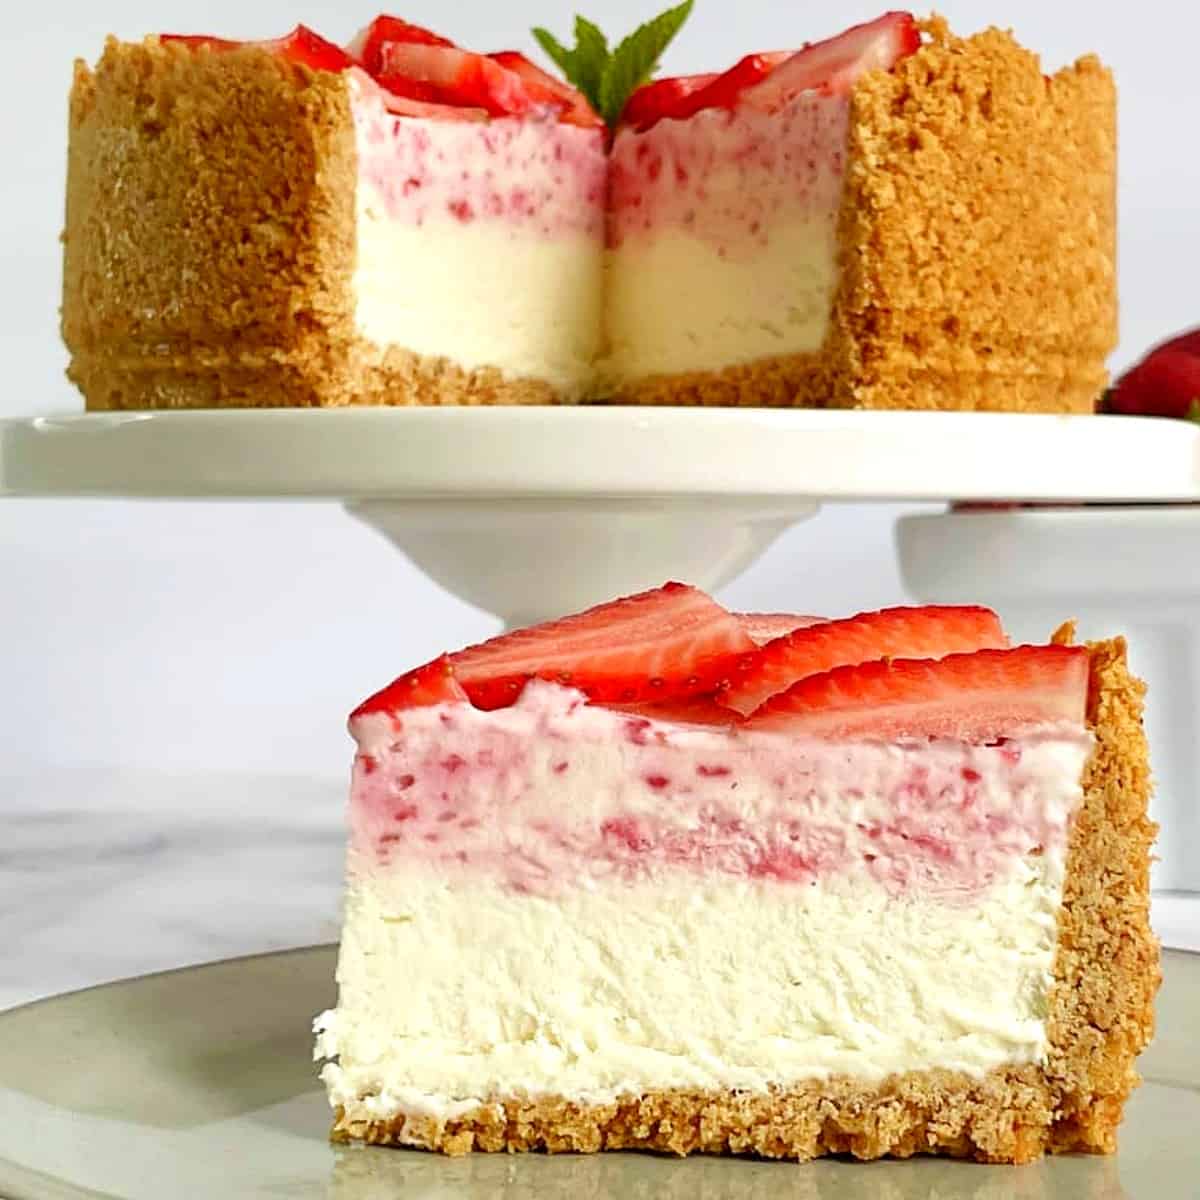 a-slice-of-strawberry-ice-cream-cheesecake-pie-in-front-of-the-pie